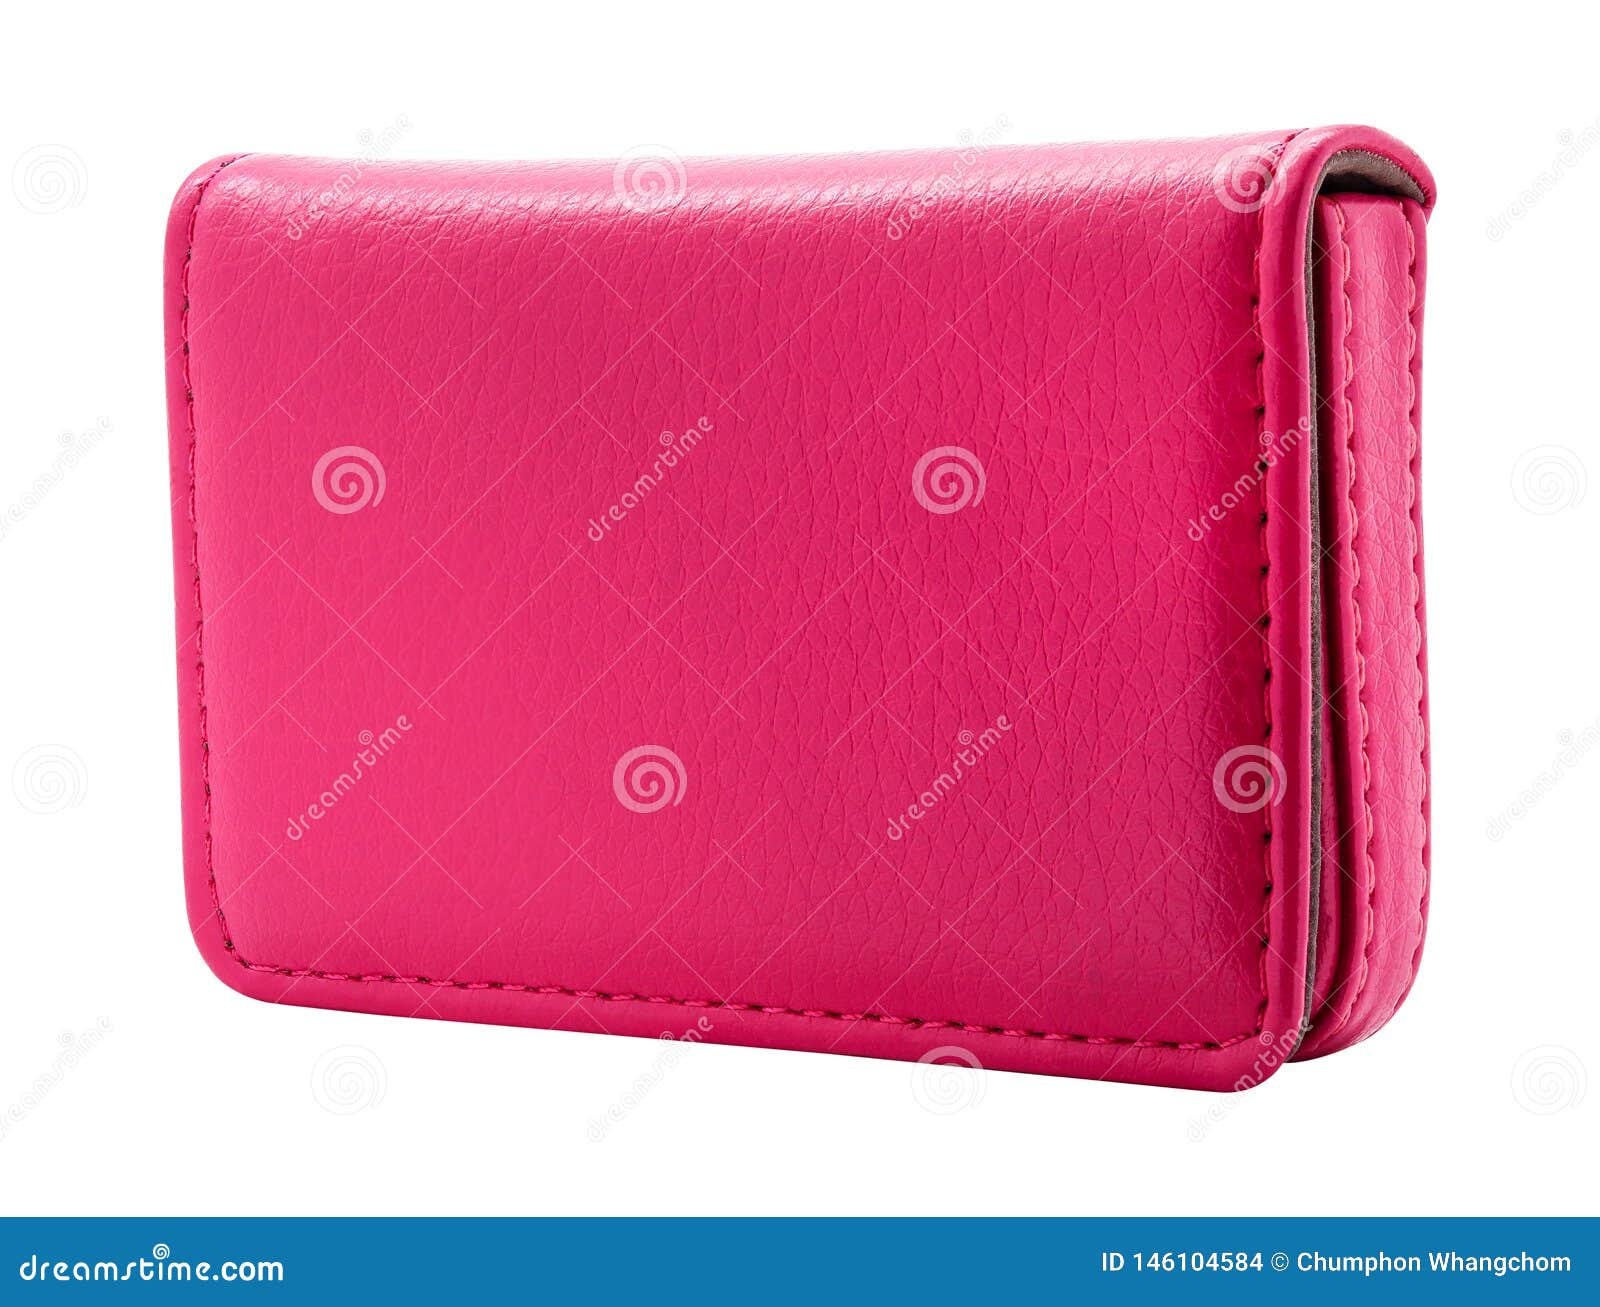 Leather Card Holder Isolated On White Background. Template Of Pink ...